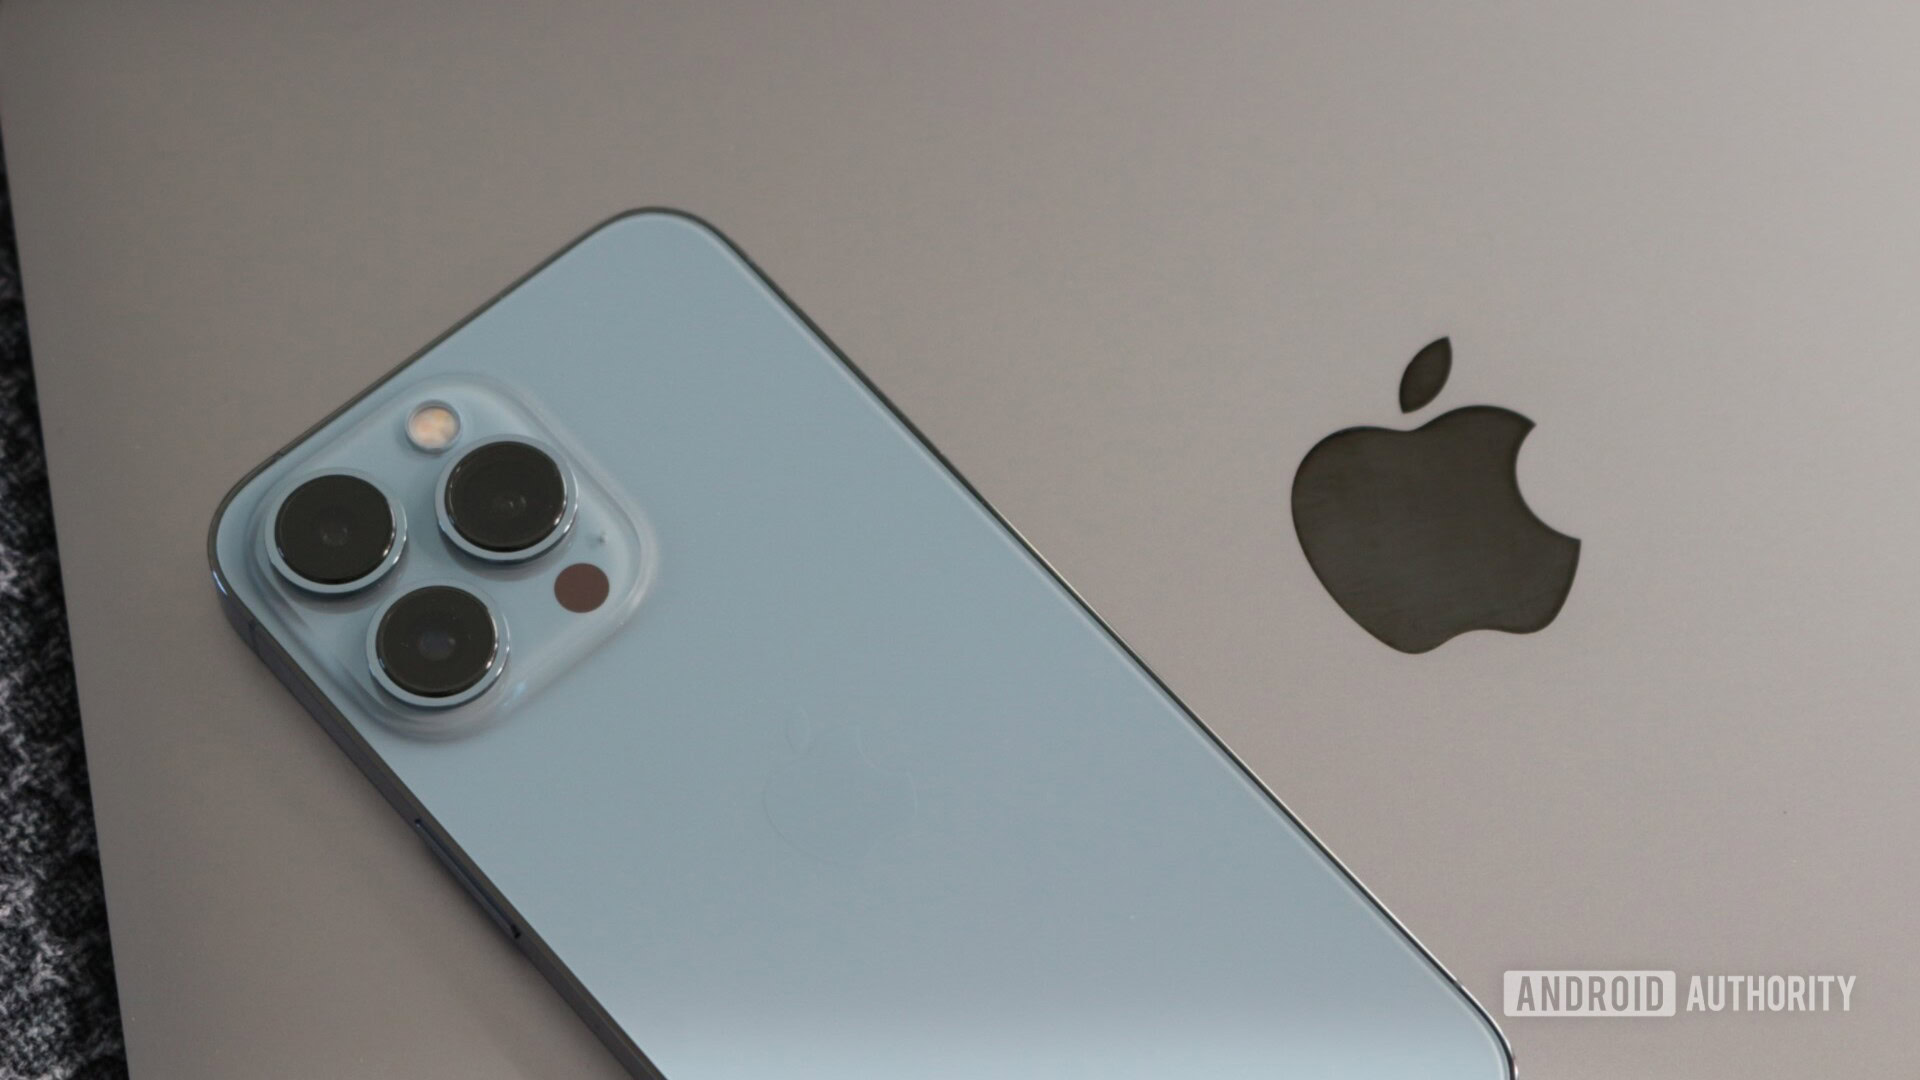 Apple iPhone 13 buyer's guide: All you need to know - Android Authority